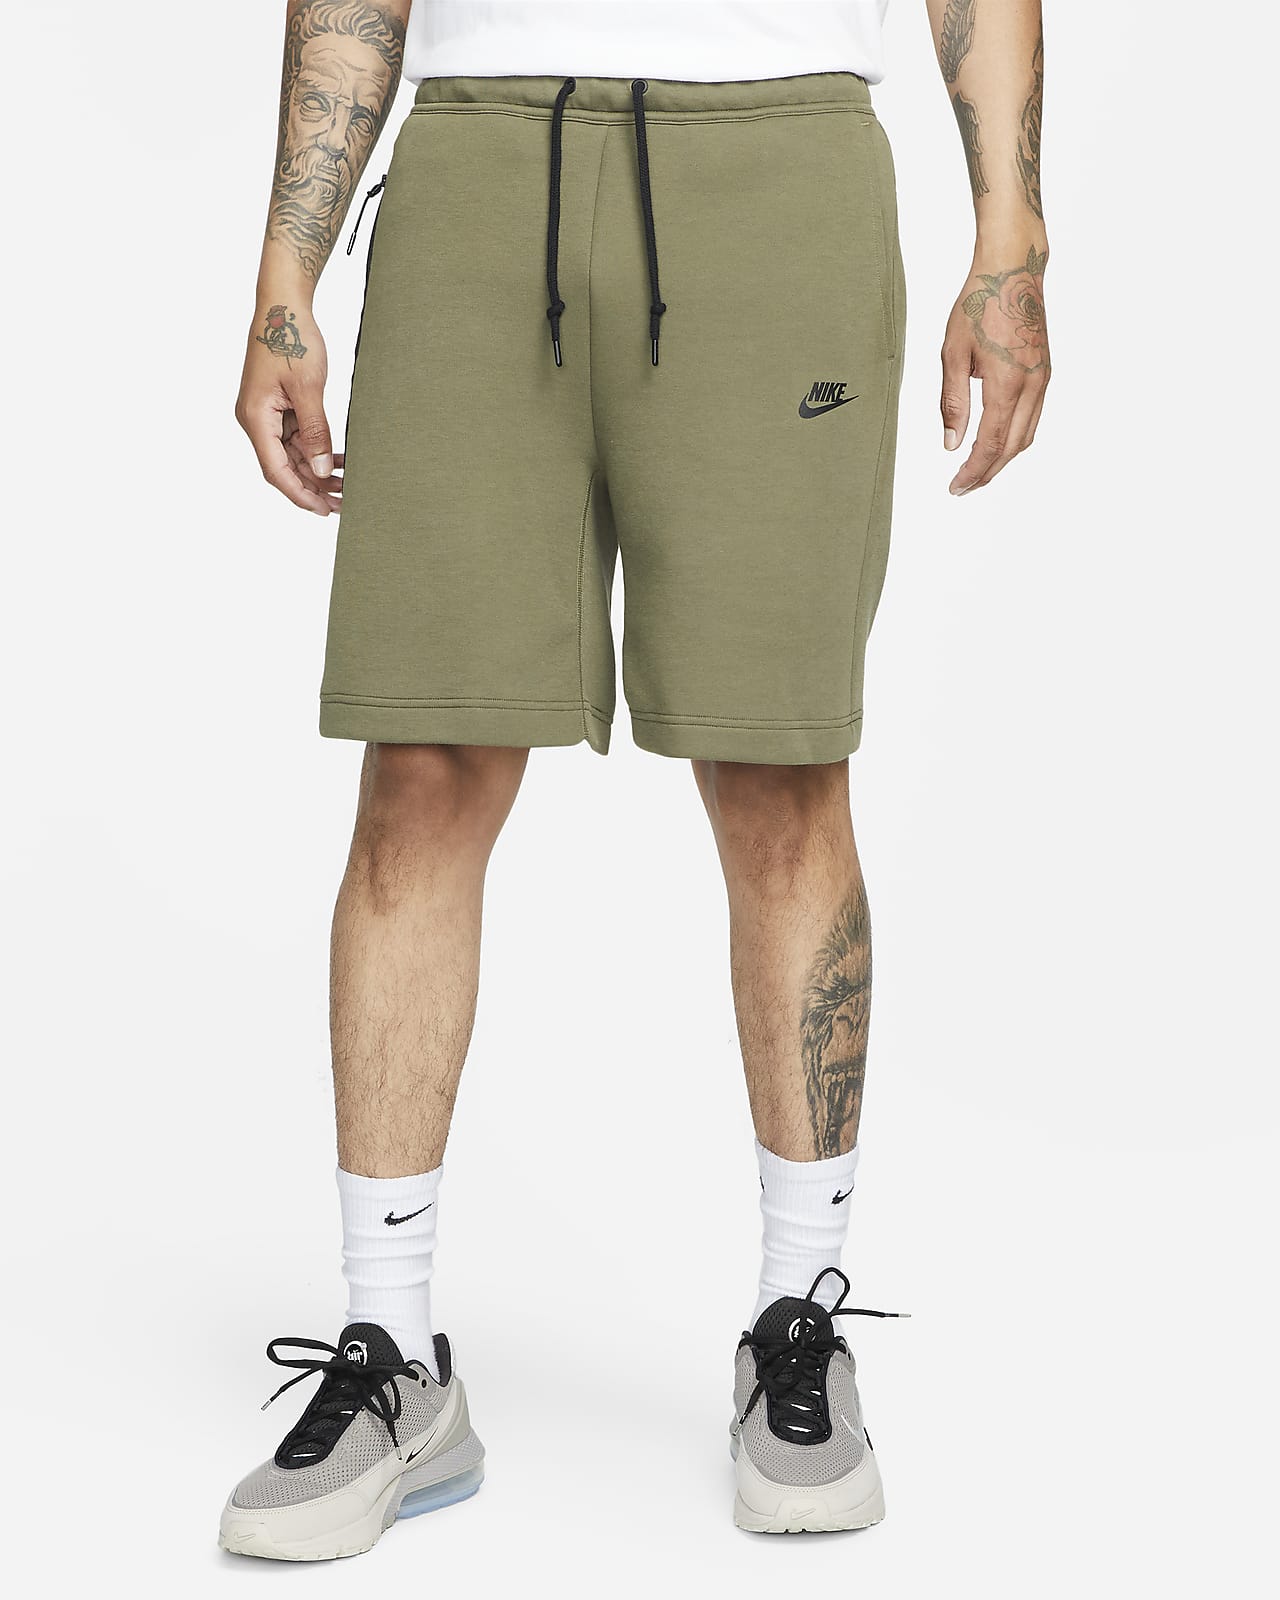 https://static.nike.com/a/images/t_PDP_1280_v1/f_auto,q_auto:eco/b580599b-ec24-44ed-af66-793b6b0c2c23/sportswear-tech-fleece-shorts-649F5z.png